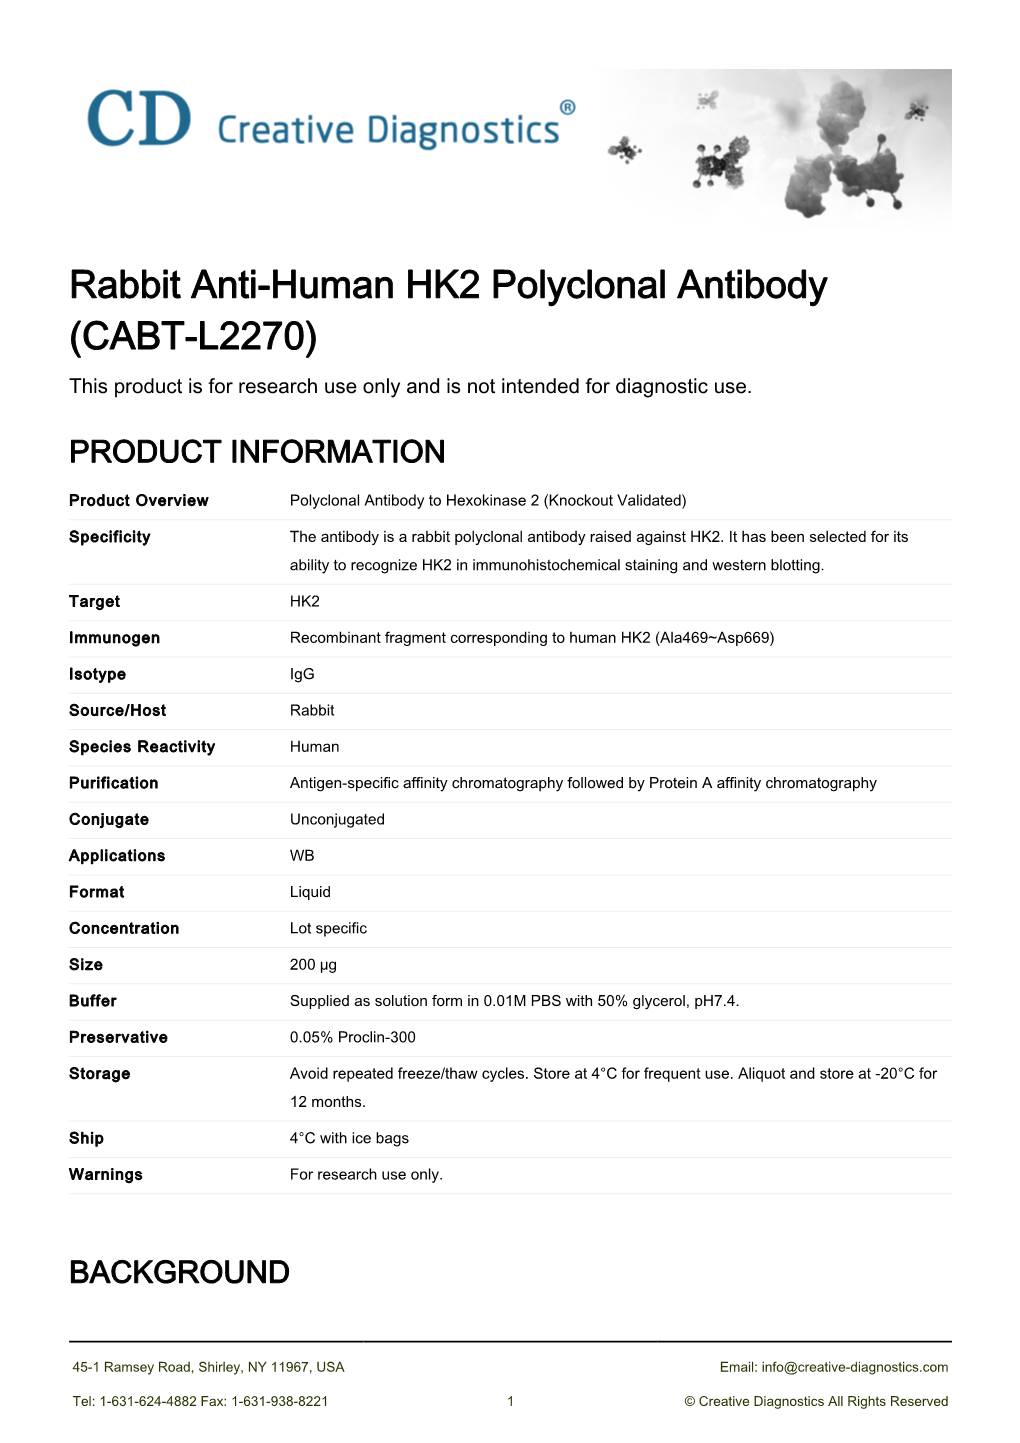 Rabbit Anti-Human HK2 Polyclonal Antibody (CABT-L2270) This Product Is for Research Use Only and Is Not Intended for Diagnostic Use